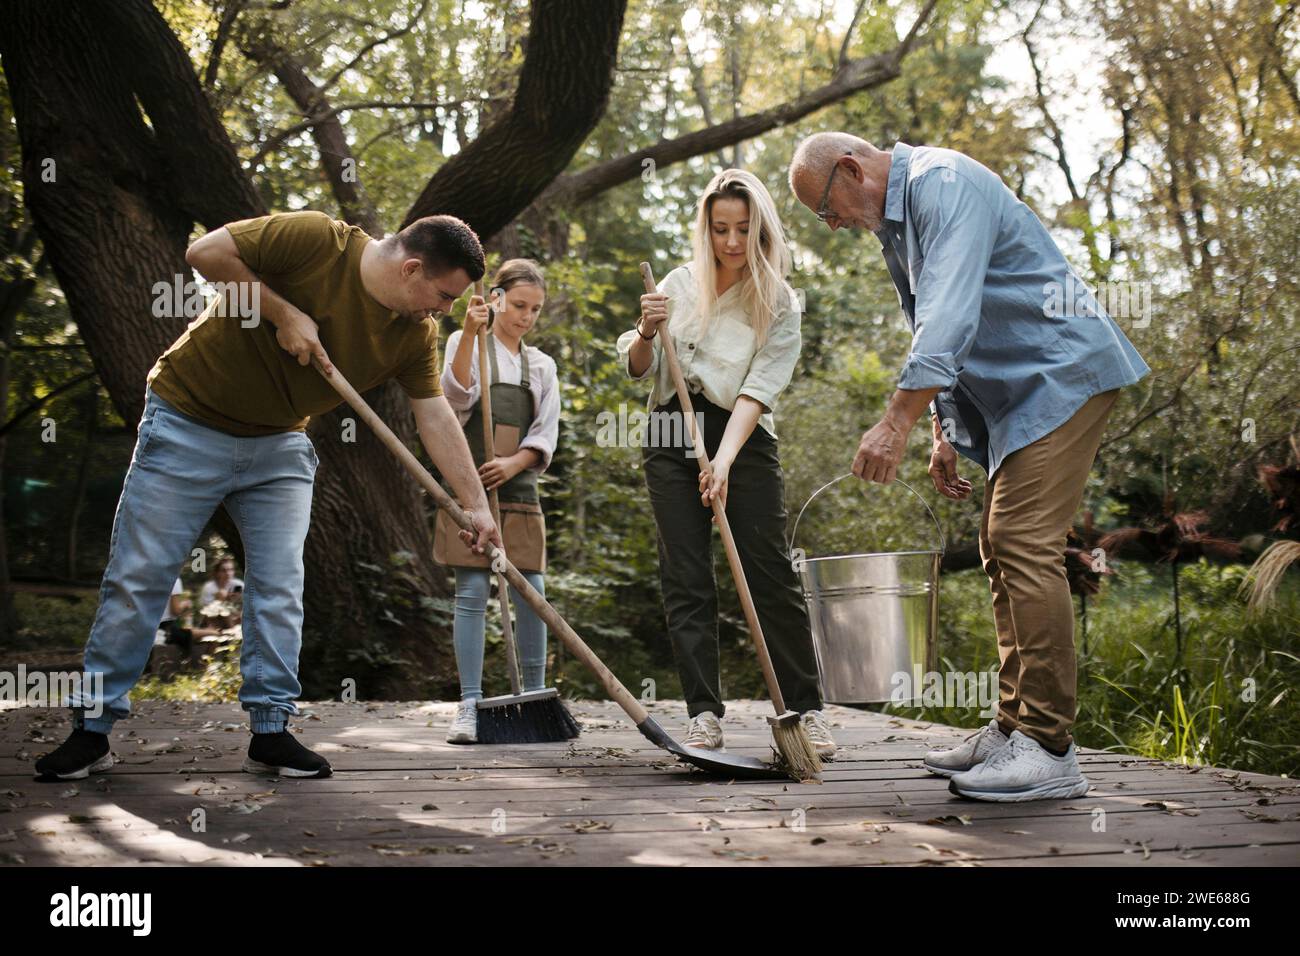 Volunteers helping at community cleanup at the local park Stock Photo